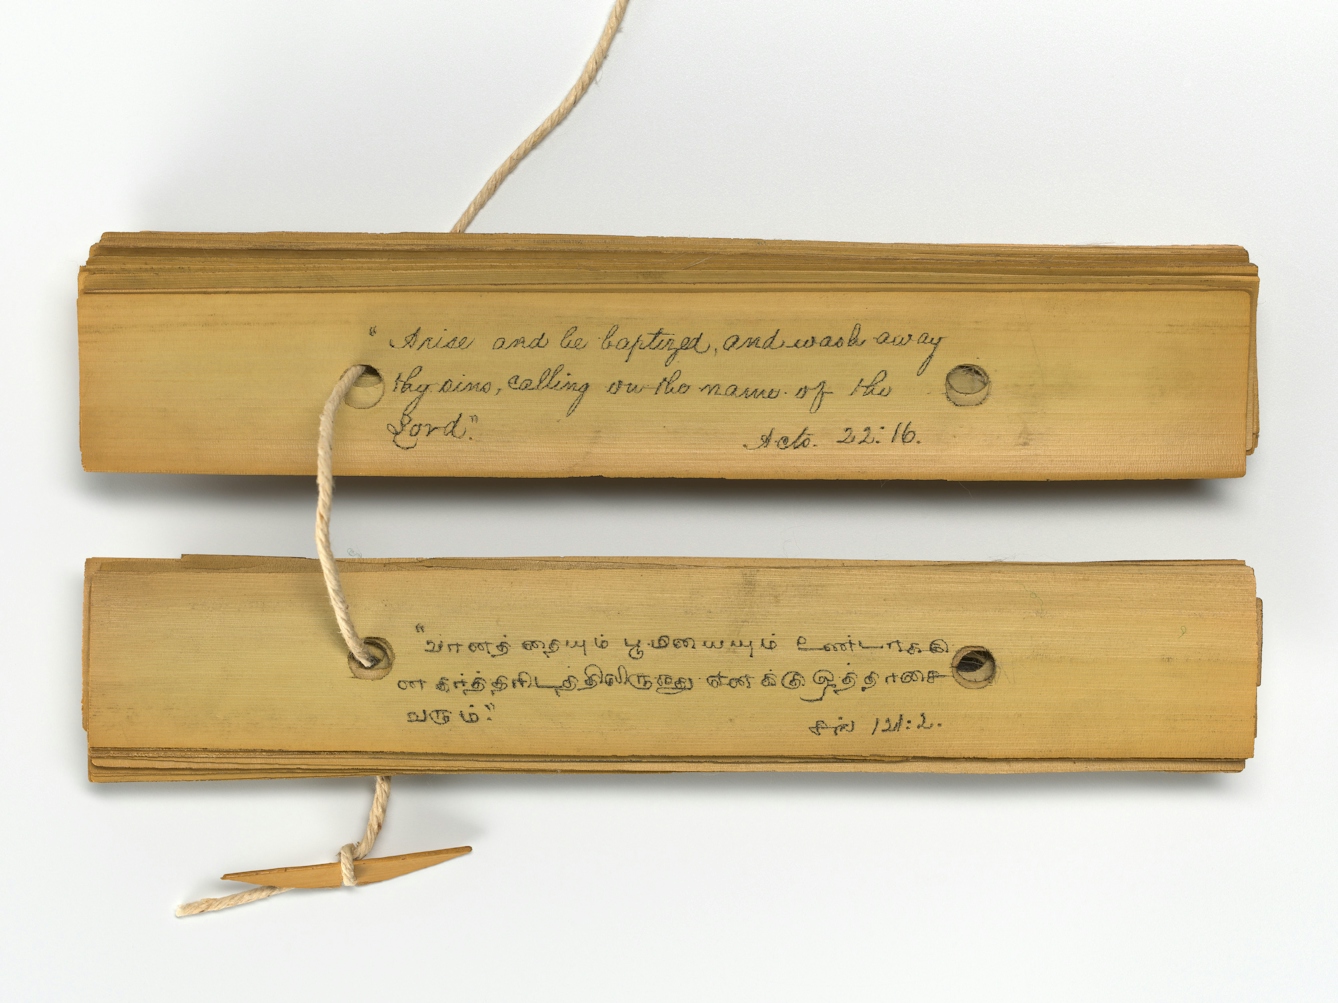 An open palm leaf manuscrip showing two pages, one in English and one in Tamil. The leaves of the manuscript and connected by a string passing through a hole piercing all of the leaves. The end of the string is fastened to a small wooden peg. The English text says 'Arise and be baptized and wash away the sins calling out the names of the Lord. Acts 2.2:16'